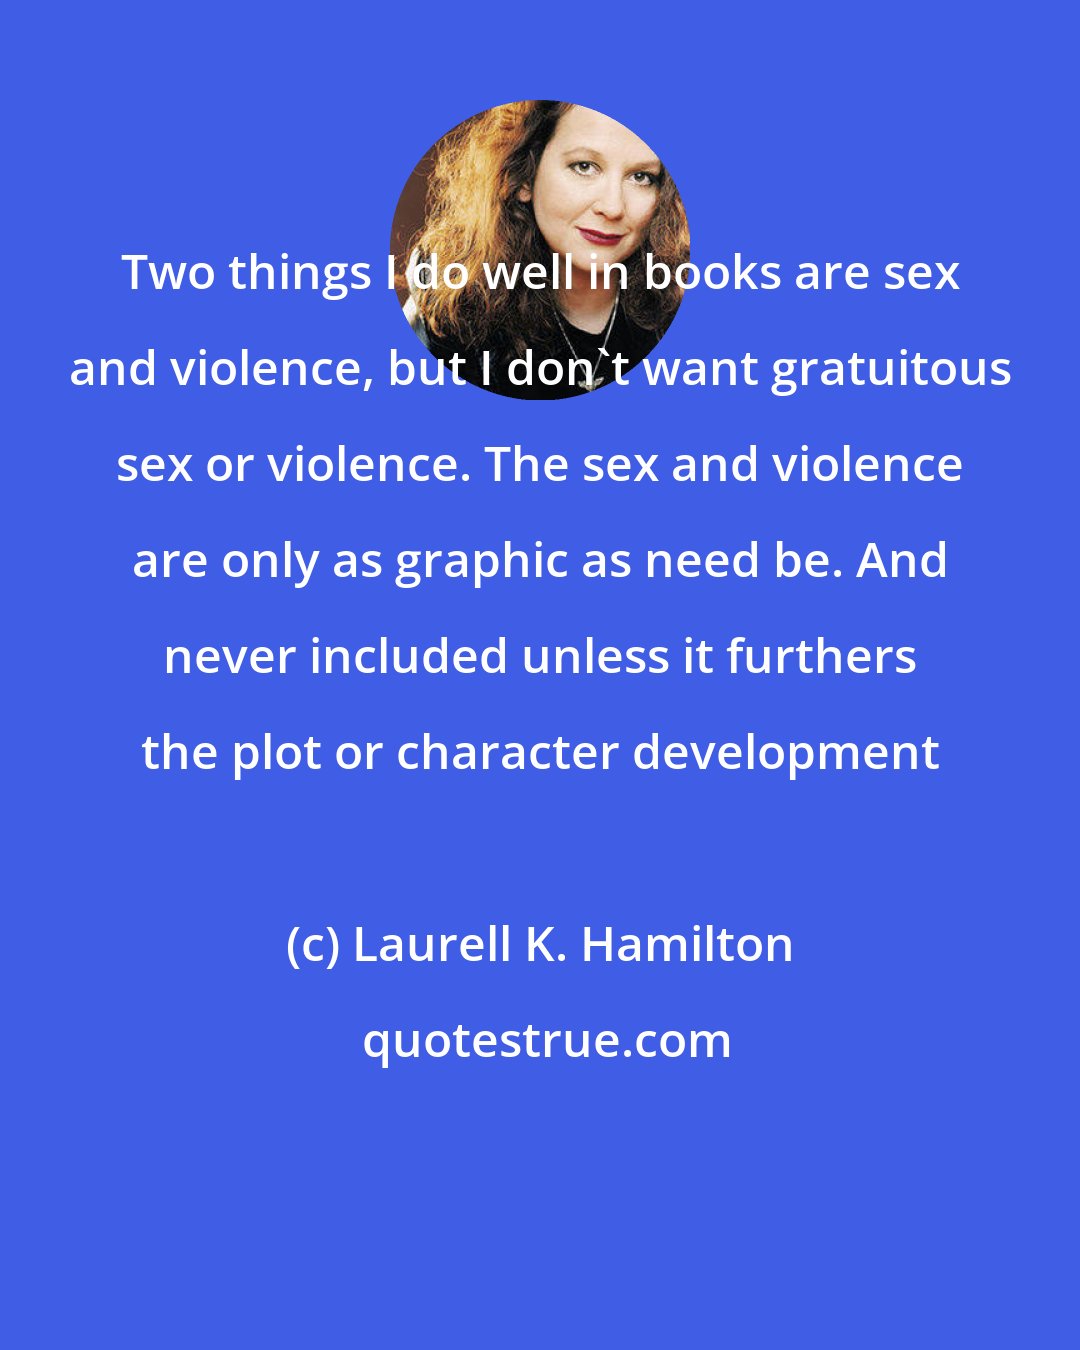 Laurell K. Hamilton: Two things I do well in books are sex and violence, but I don't want gratuitous sex or violence. The sex and violence are only as graphic as need be. And never included unless it furthers the plot or character development